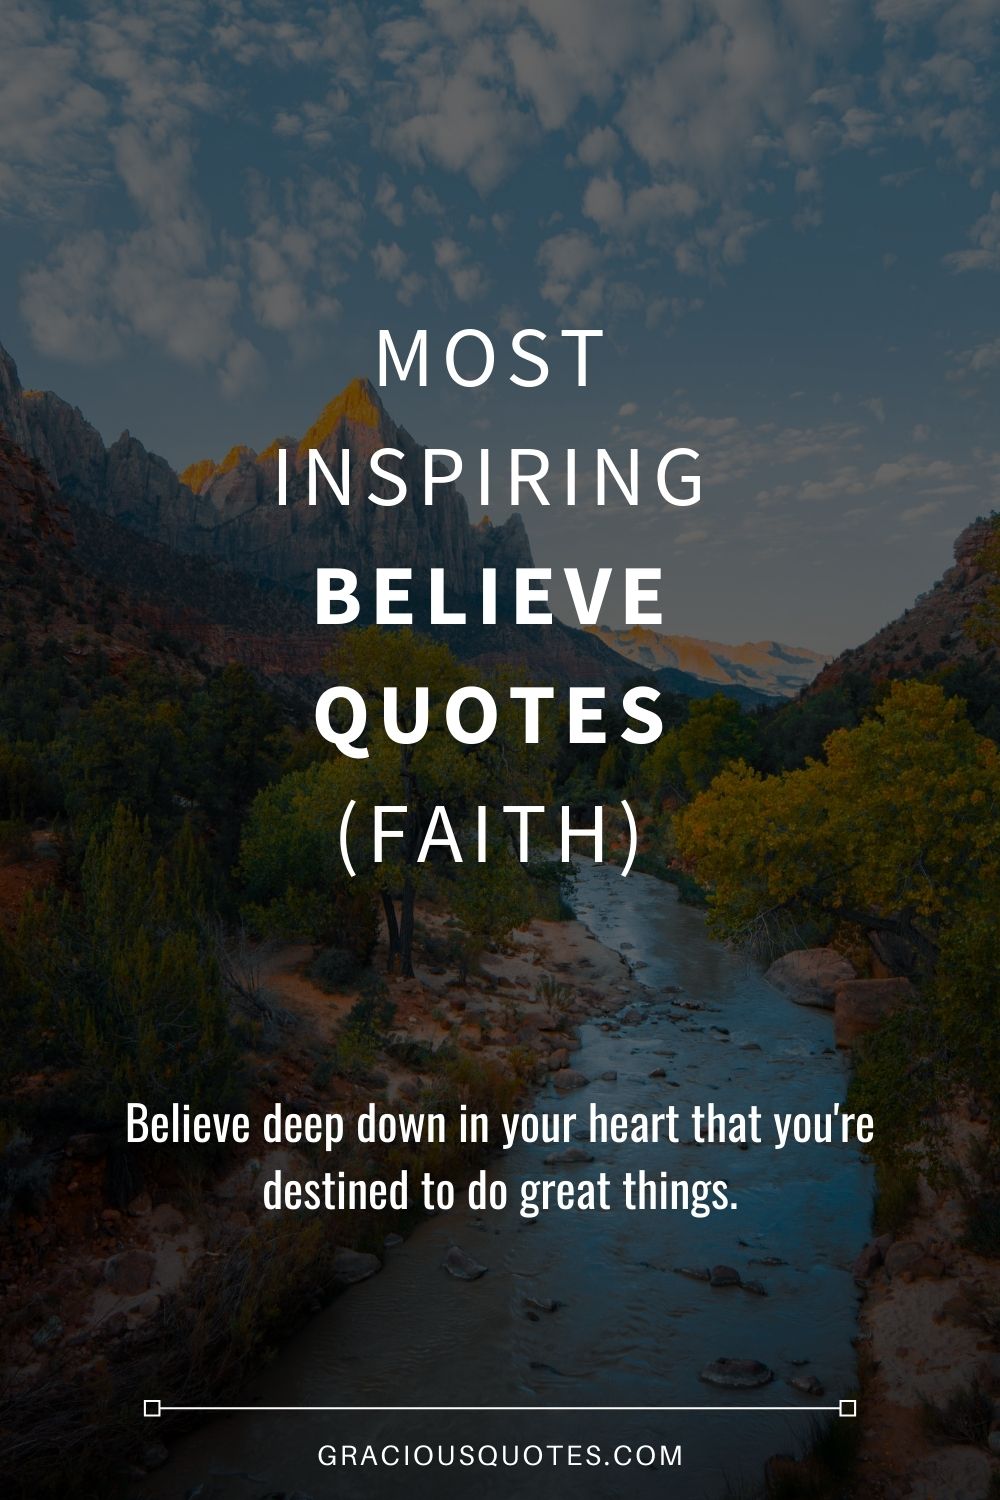 Most Inspiring Believe Quotes (FAITH) - Gracious Quotes